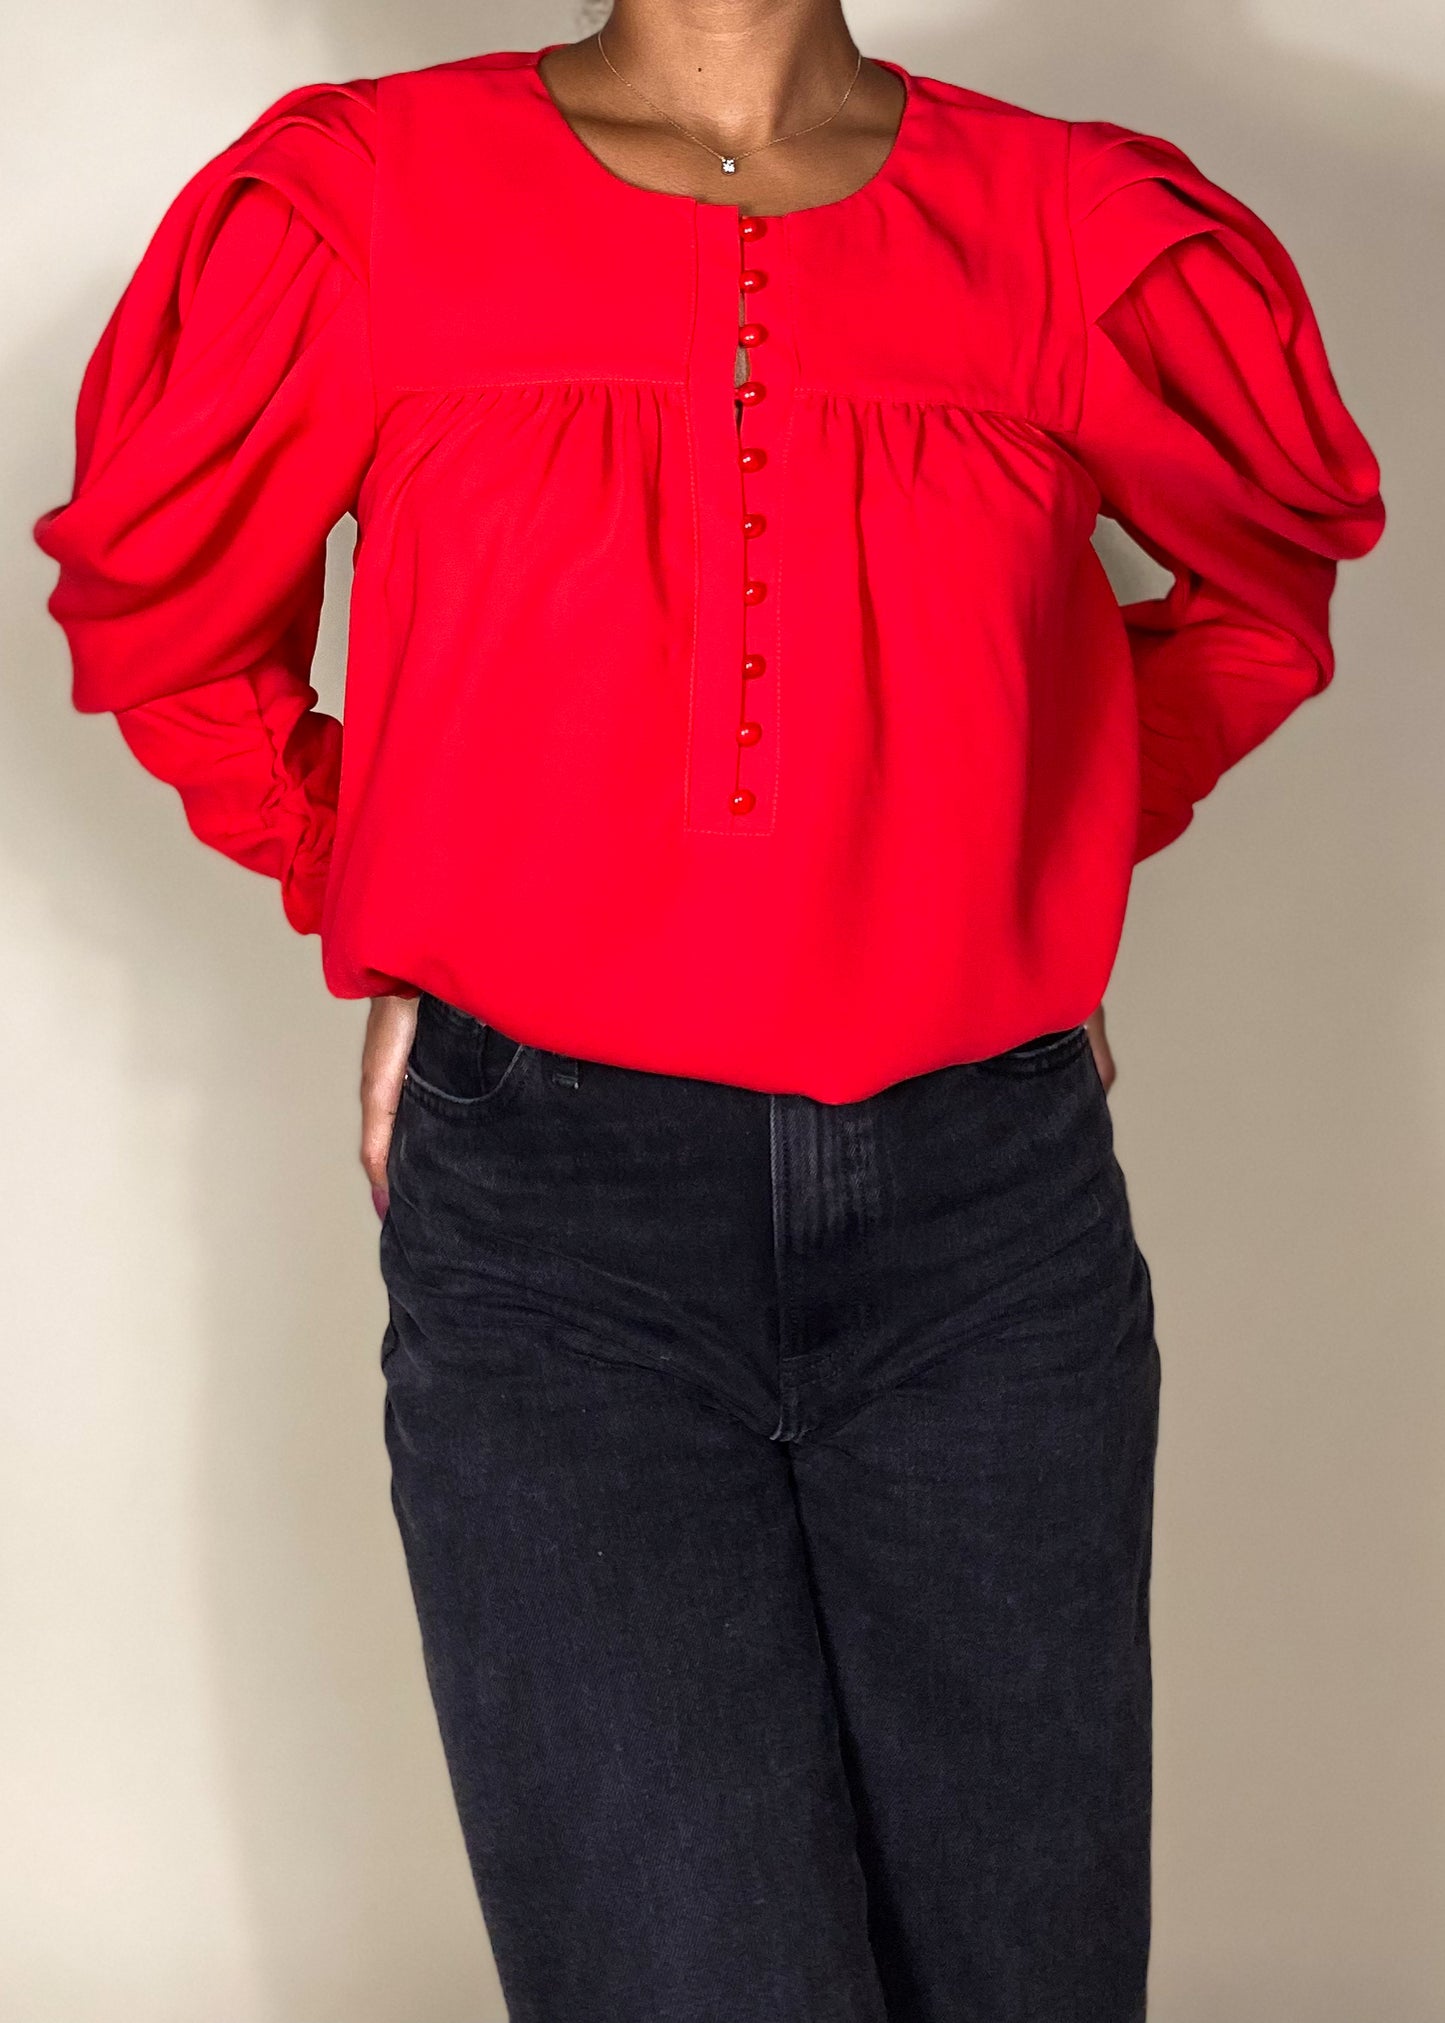 Carnation Red Blouse